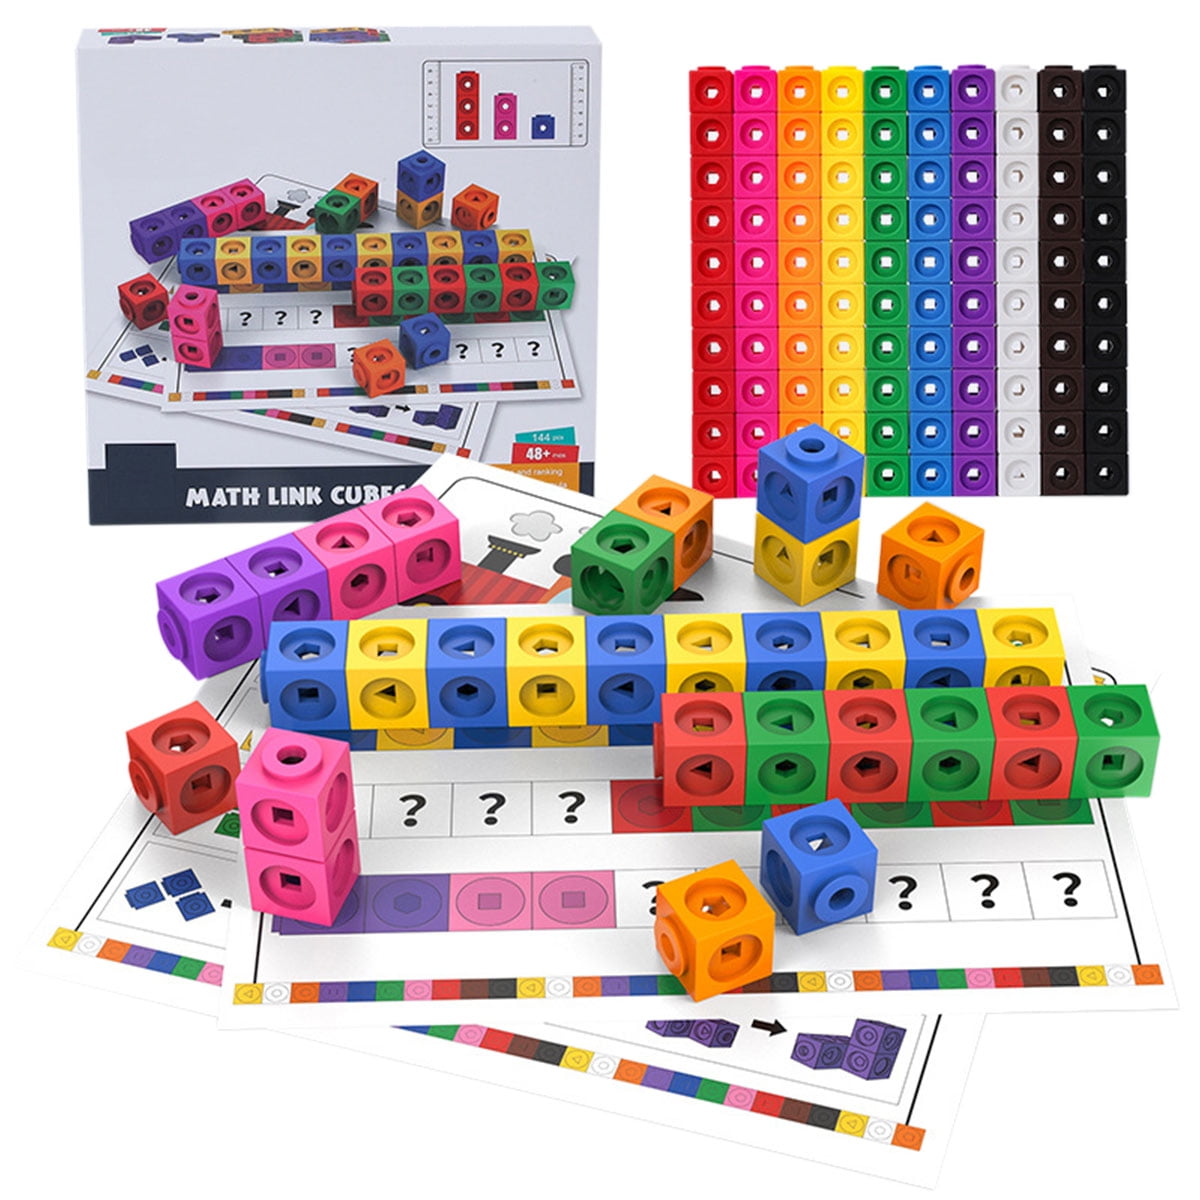 Maths Link Counting Cubes Pack of 50 Black Linking Cubes 2cm x 2cm x 2cm 